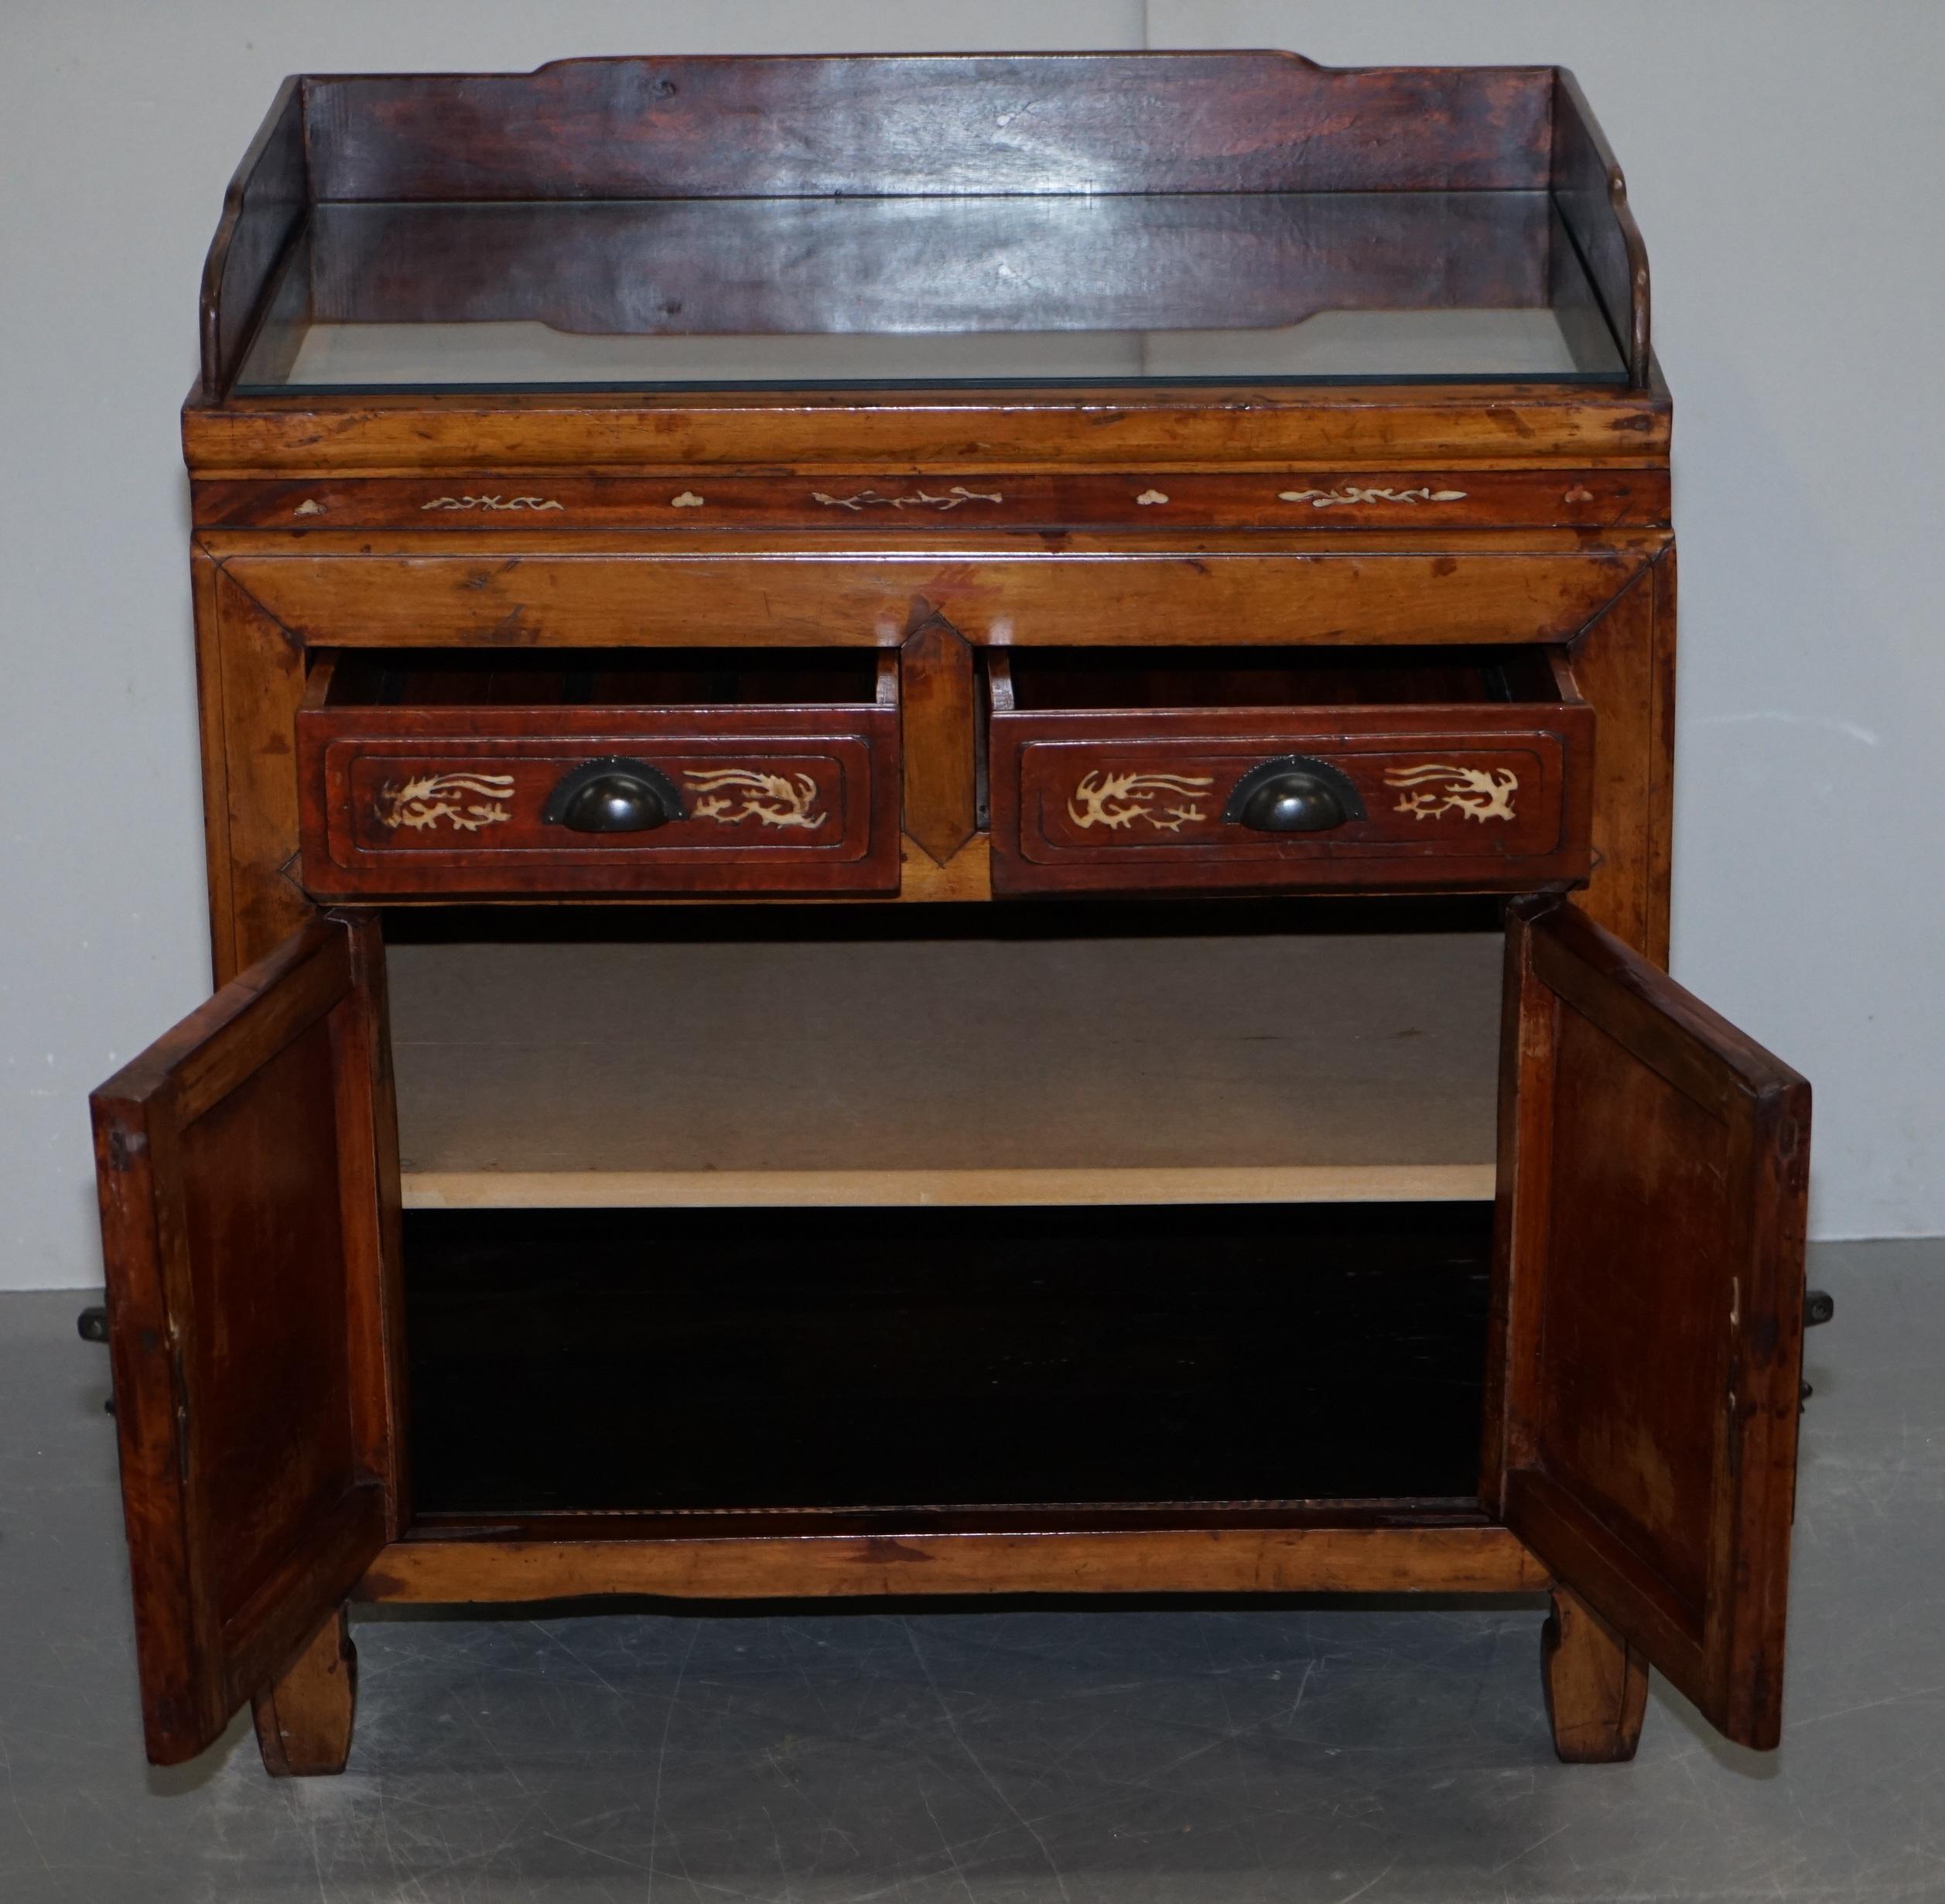 Antique Chinese Export circa 1900 Redwood Lacquered Inlaid Wash Stand Sideboard For Sale 3